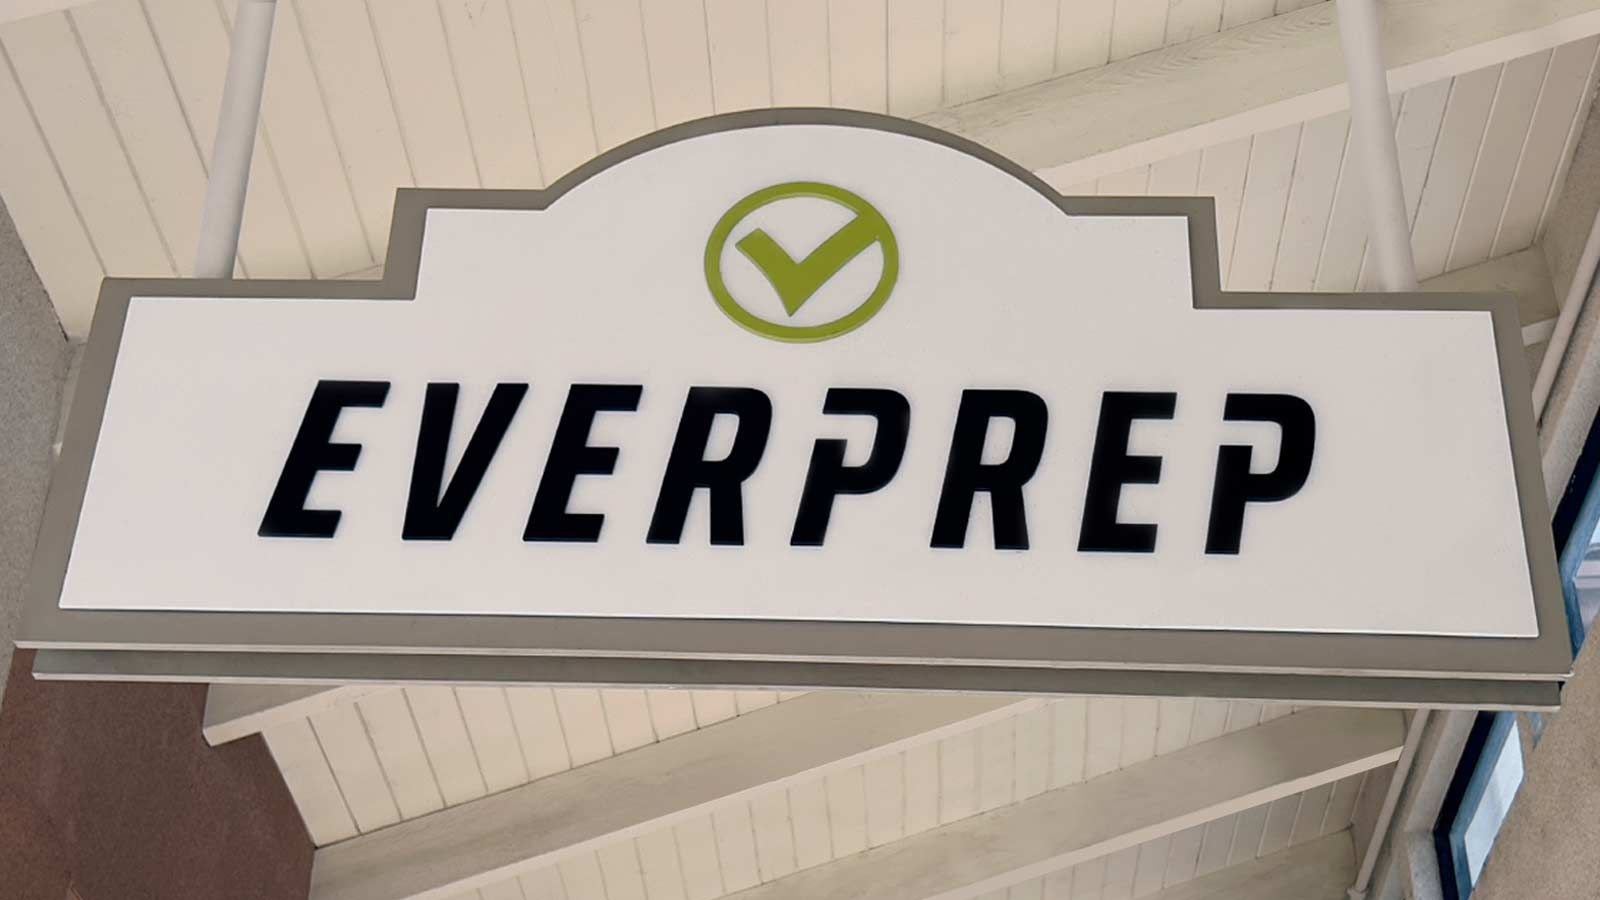 Everprep wooden sign hanging from the ceiling